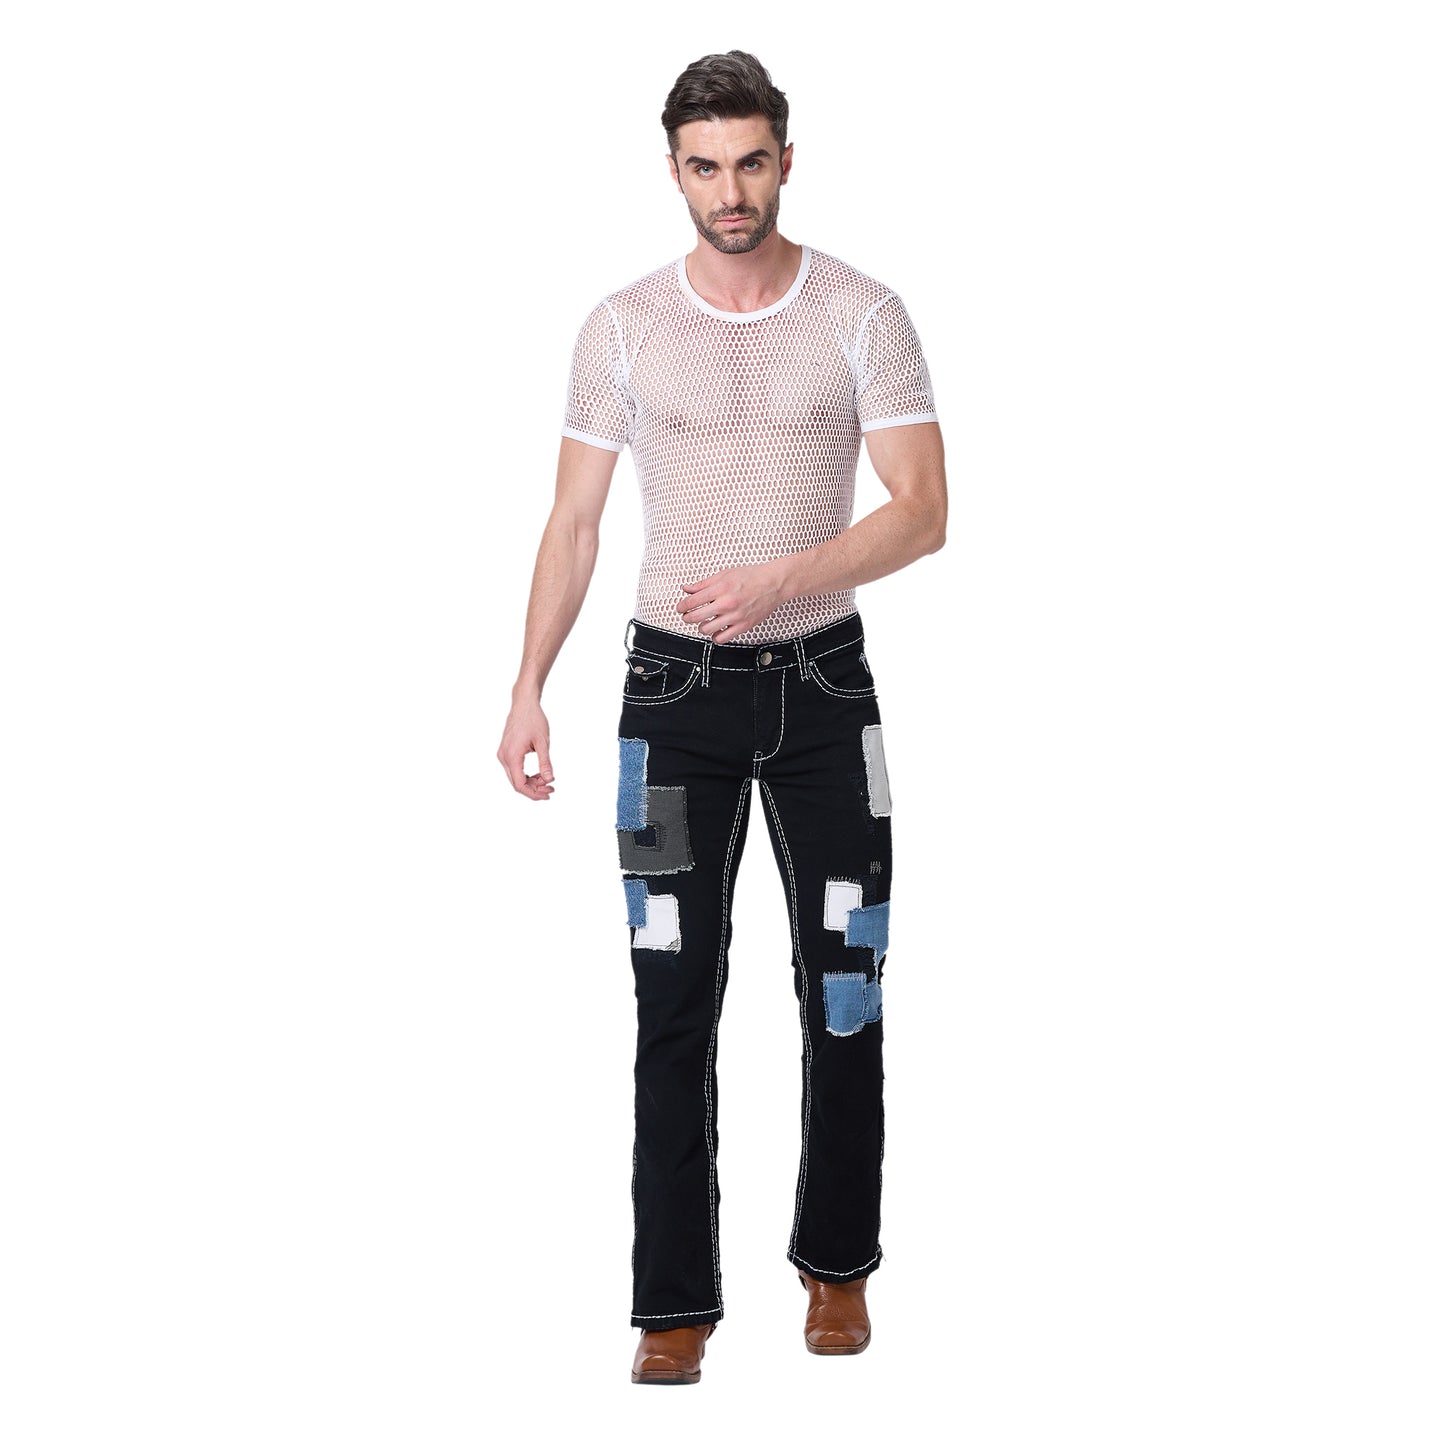 Mens Black Bootcut Slim Fit Jeans With Saddle Stitch Strechable.